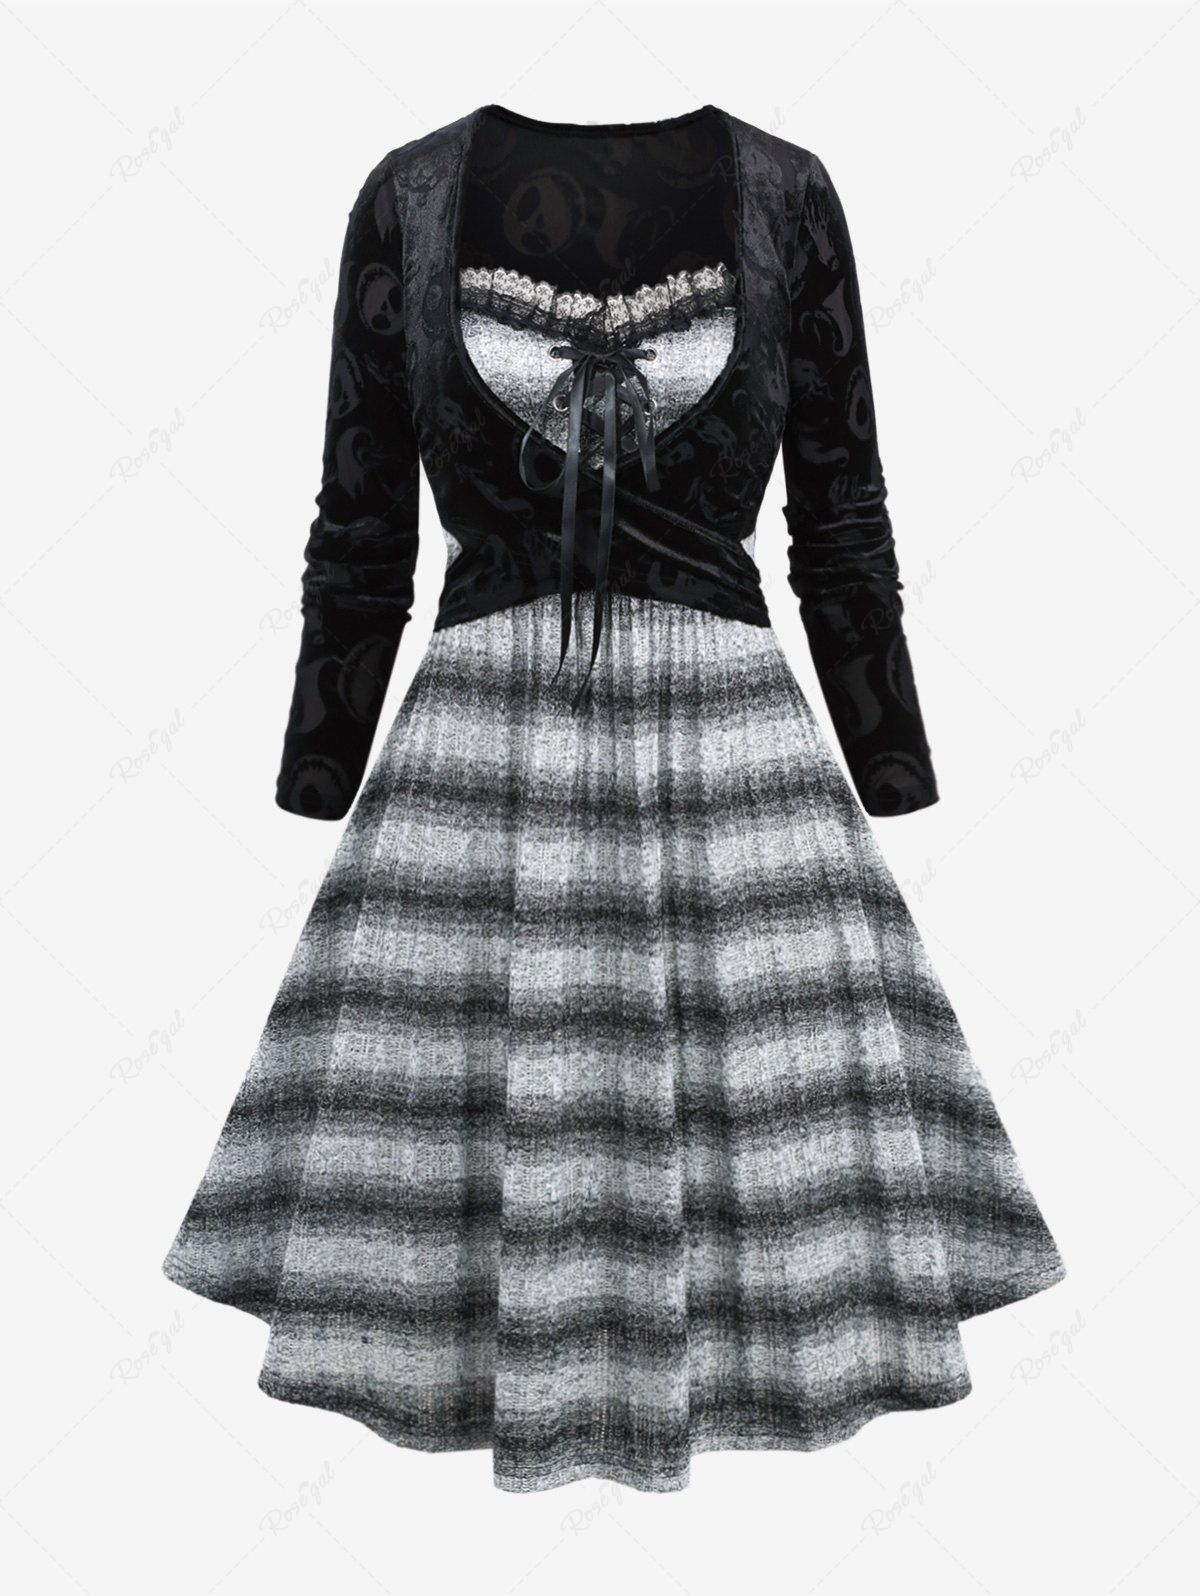 Store Plus Size Skull Ghost Flocking Crossover Lace-up Ruffle Lace Striped Knitted Halloween 2 in 1 Dress  